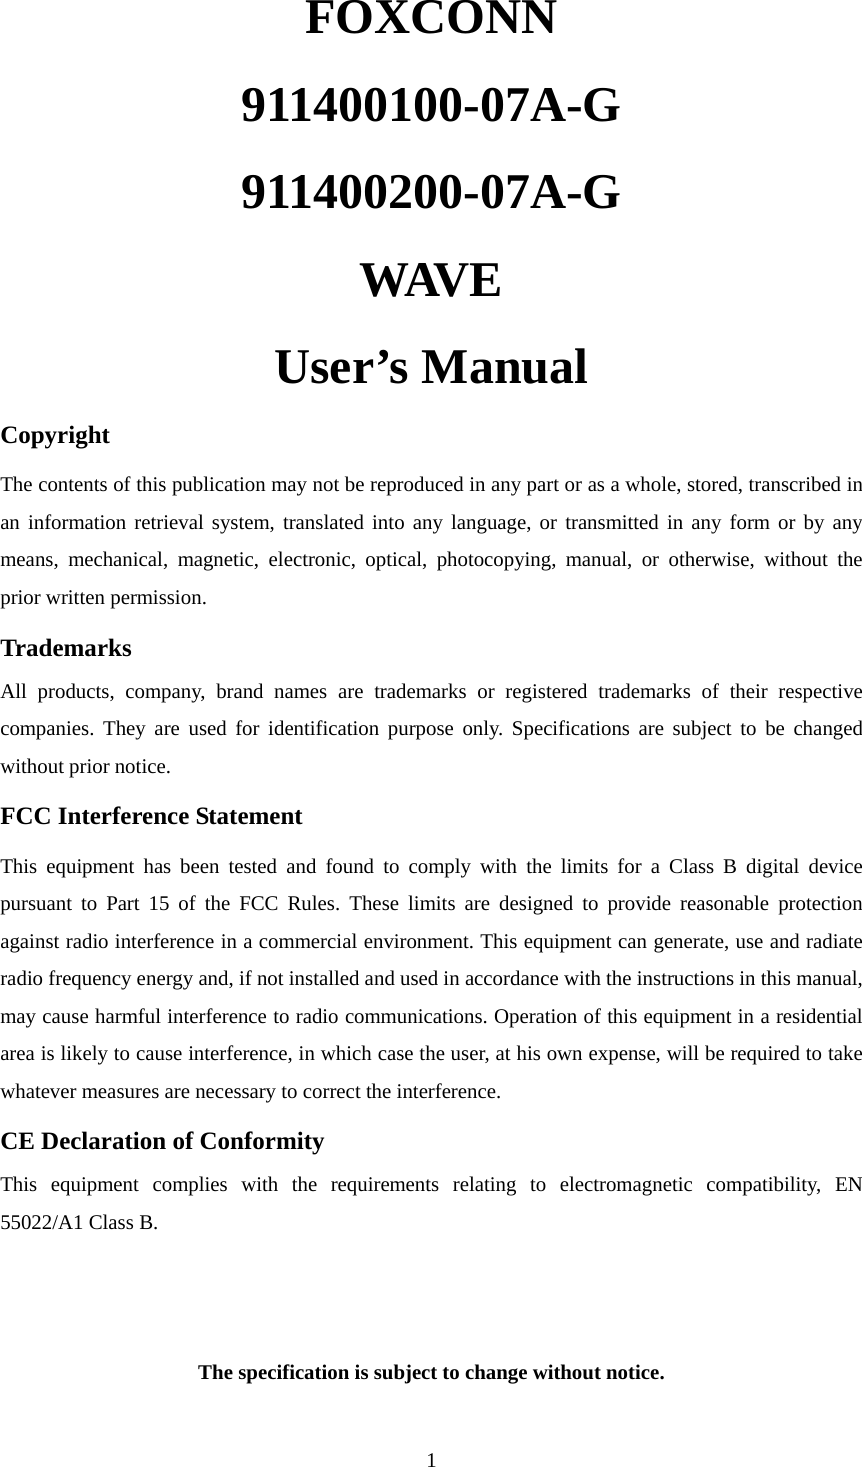  1FOXCONN 911400100-07A-G 911400200-07A-G WAVE     User’s Manual Copyright The contents of this publication may not be reproduced in any part or as a whole, stored, transcribed in an information retrieval system, translated into any language, or transmitted in any form or by any means, mechanical, magnetic, electronic, optical, photocopying, manual, or otherwise, without the prior written permission. Trademarks All products, company, brand names are trademarks or registered trademarks of their respective companies. They are used for identification purpose only. Specifications are subject to be changed without prior notice. FCC Interference Statement This equipment has been tested and found to comply with the limits for a Class B digital device pursuant to Part 15 of the FCC Rules. These limits are designed to provide reasonable protection against radio interference in a commercial environment. This equipment can generate, use and radiate radio frequency energy and, if not installed and used in accordance with the instructions in this manual, may cause harmful interference to radio communications. Operation of this equipment in a residential area is likely to cause interference, in which case the user, at his own expense, will be required to take whatever measures are necessary to correct the interference. CE Declaration of Conformity This equipment complies with the requirements relating to electromagnetic compatibility, EN 55022/A1 Class B.   The specification is subject to change without notice.